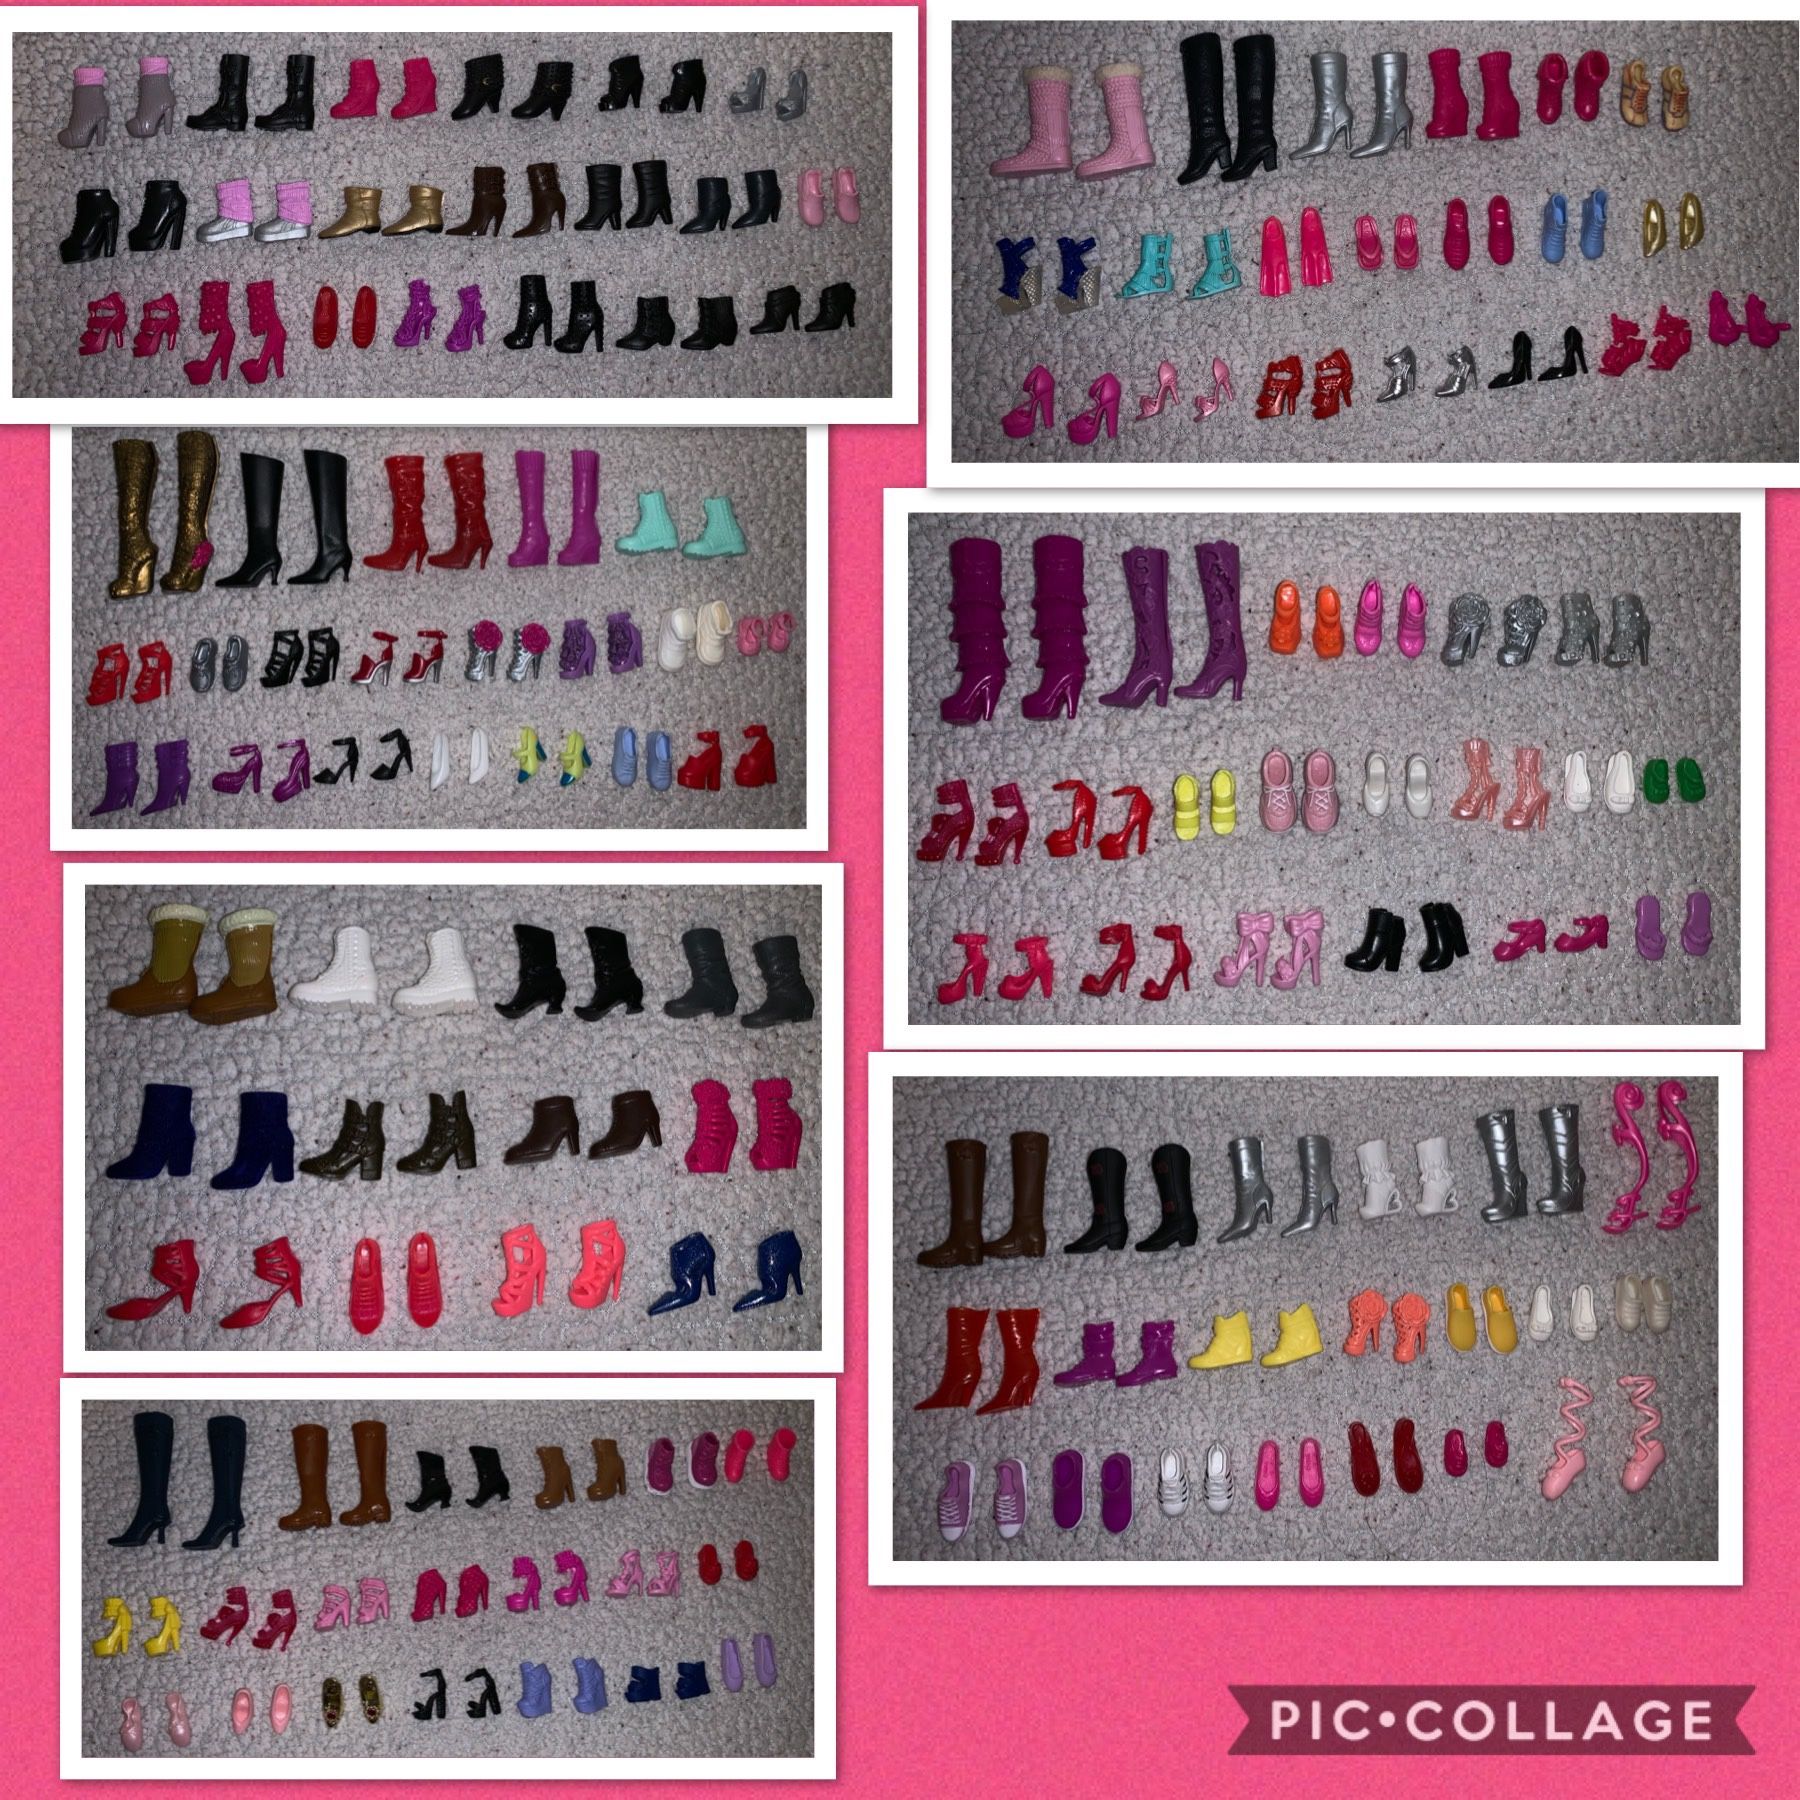 Barbie shoes lote